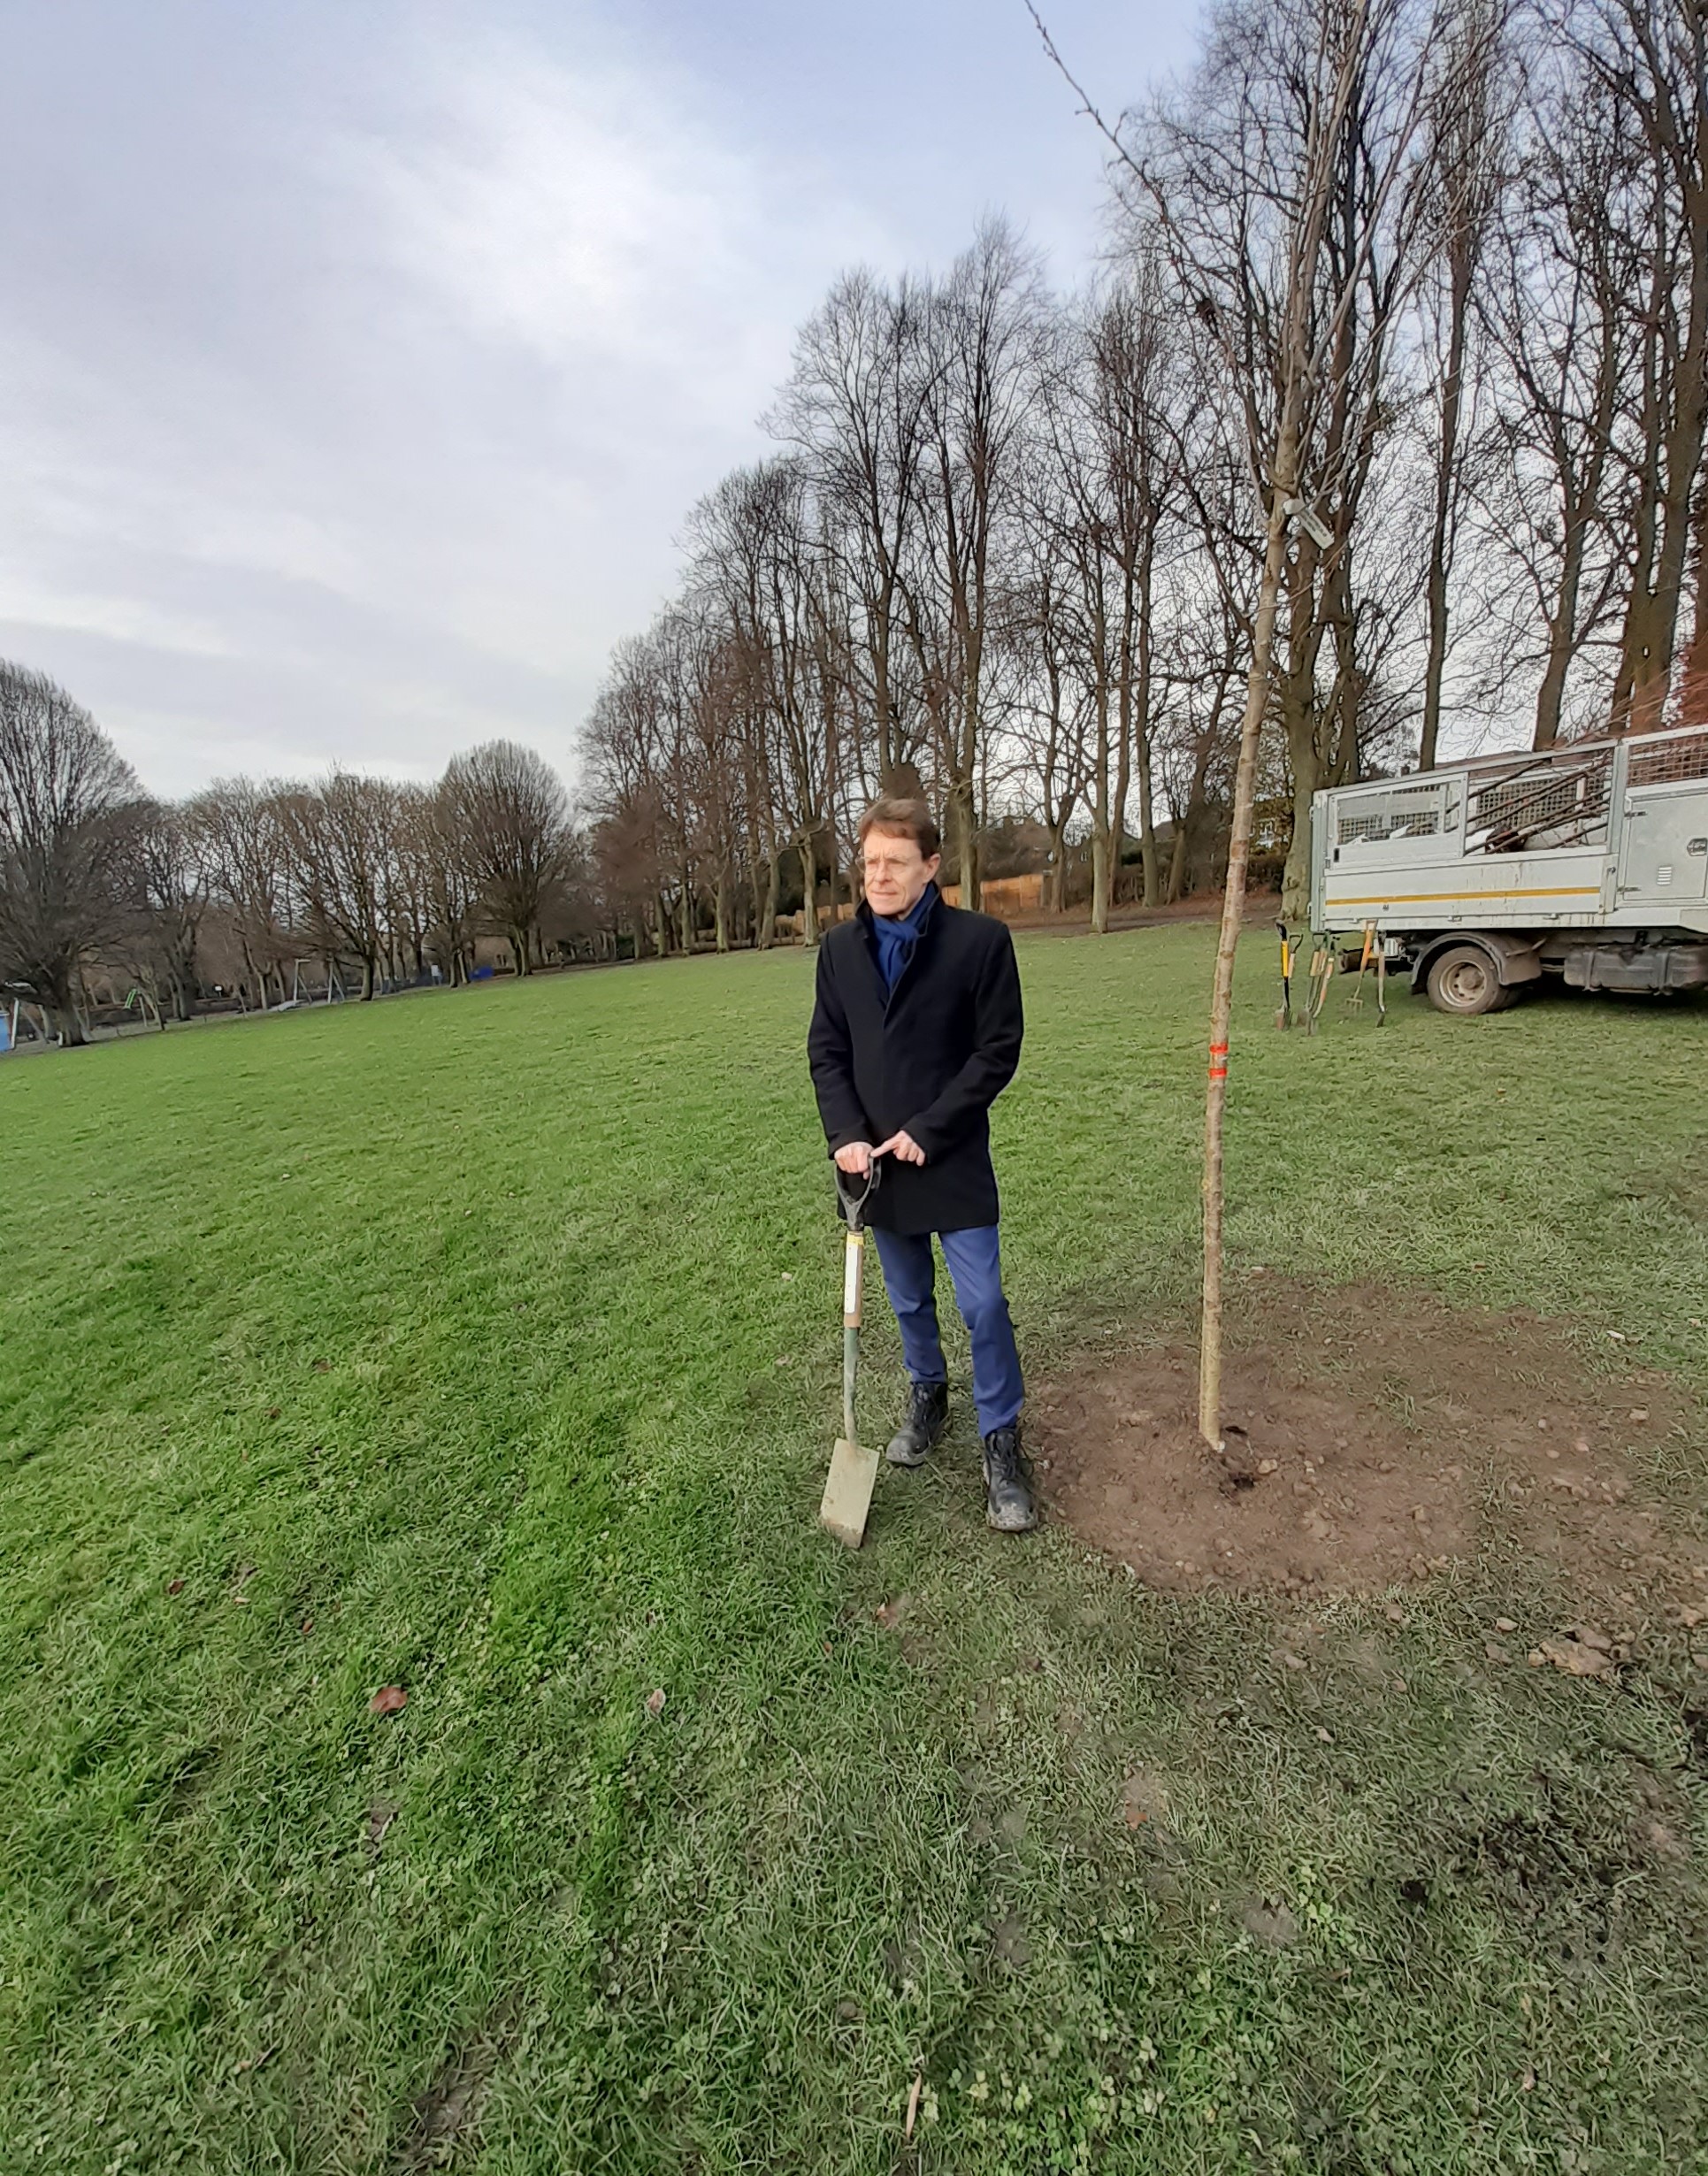 Andy Street, the Mayor of the West Midlands tree planting in Walsall Arboretum in 2020